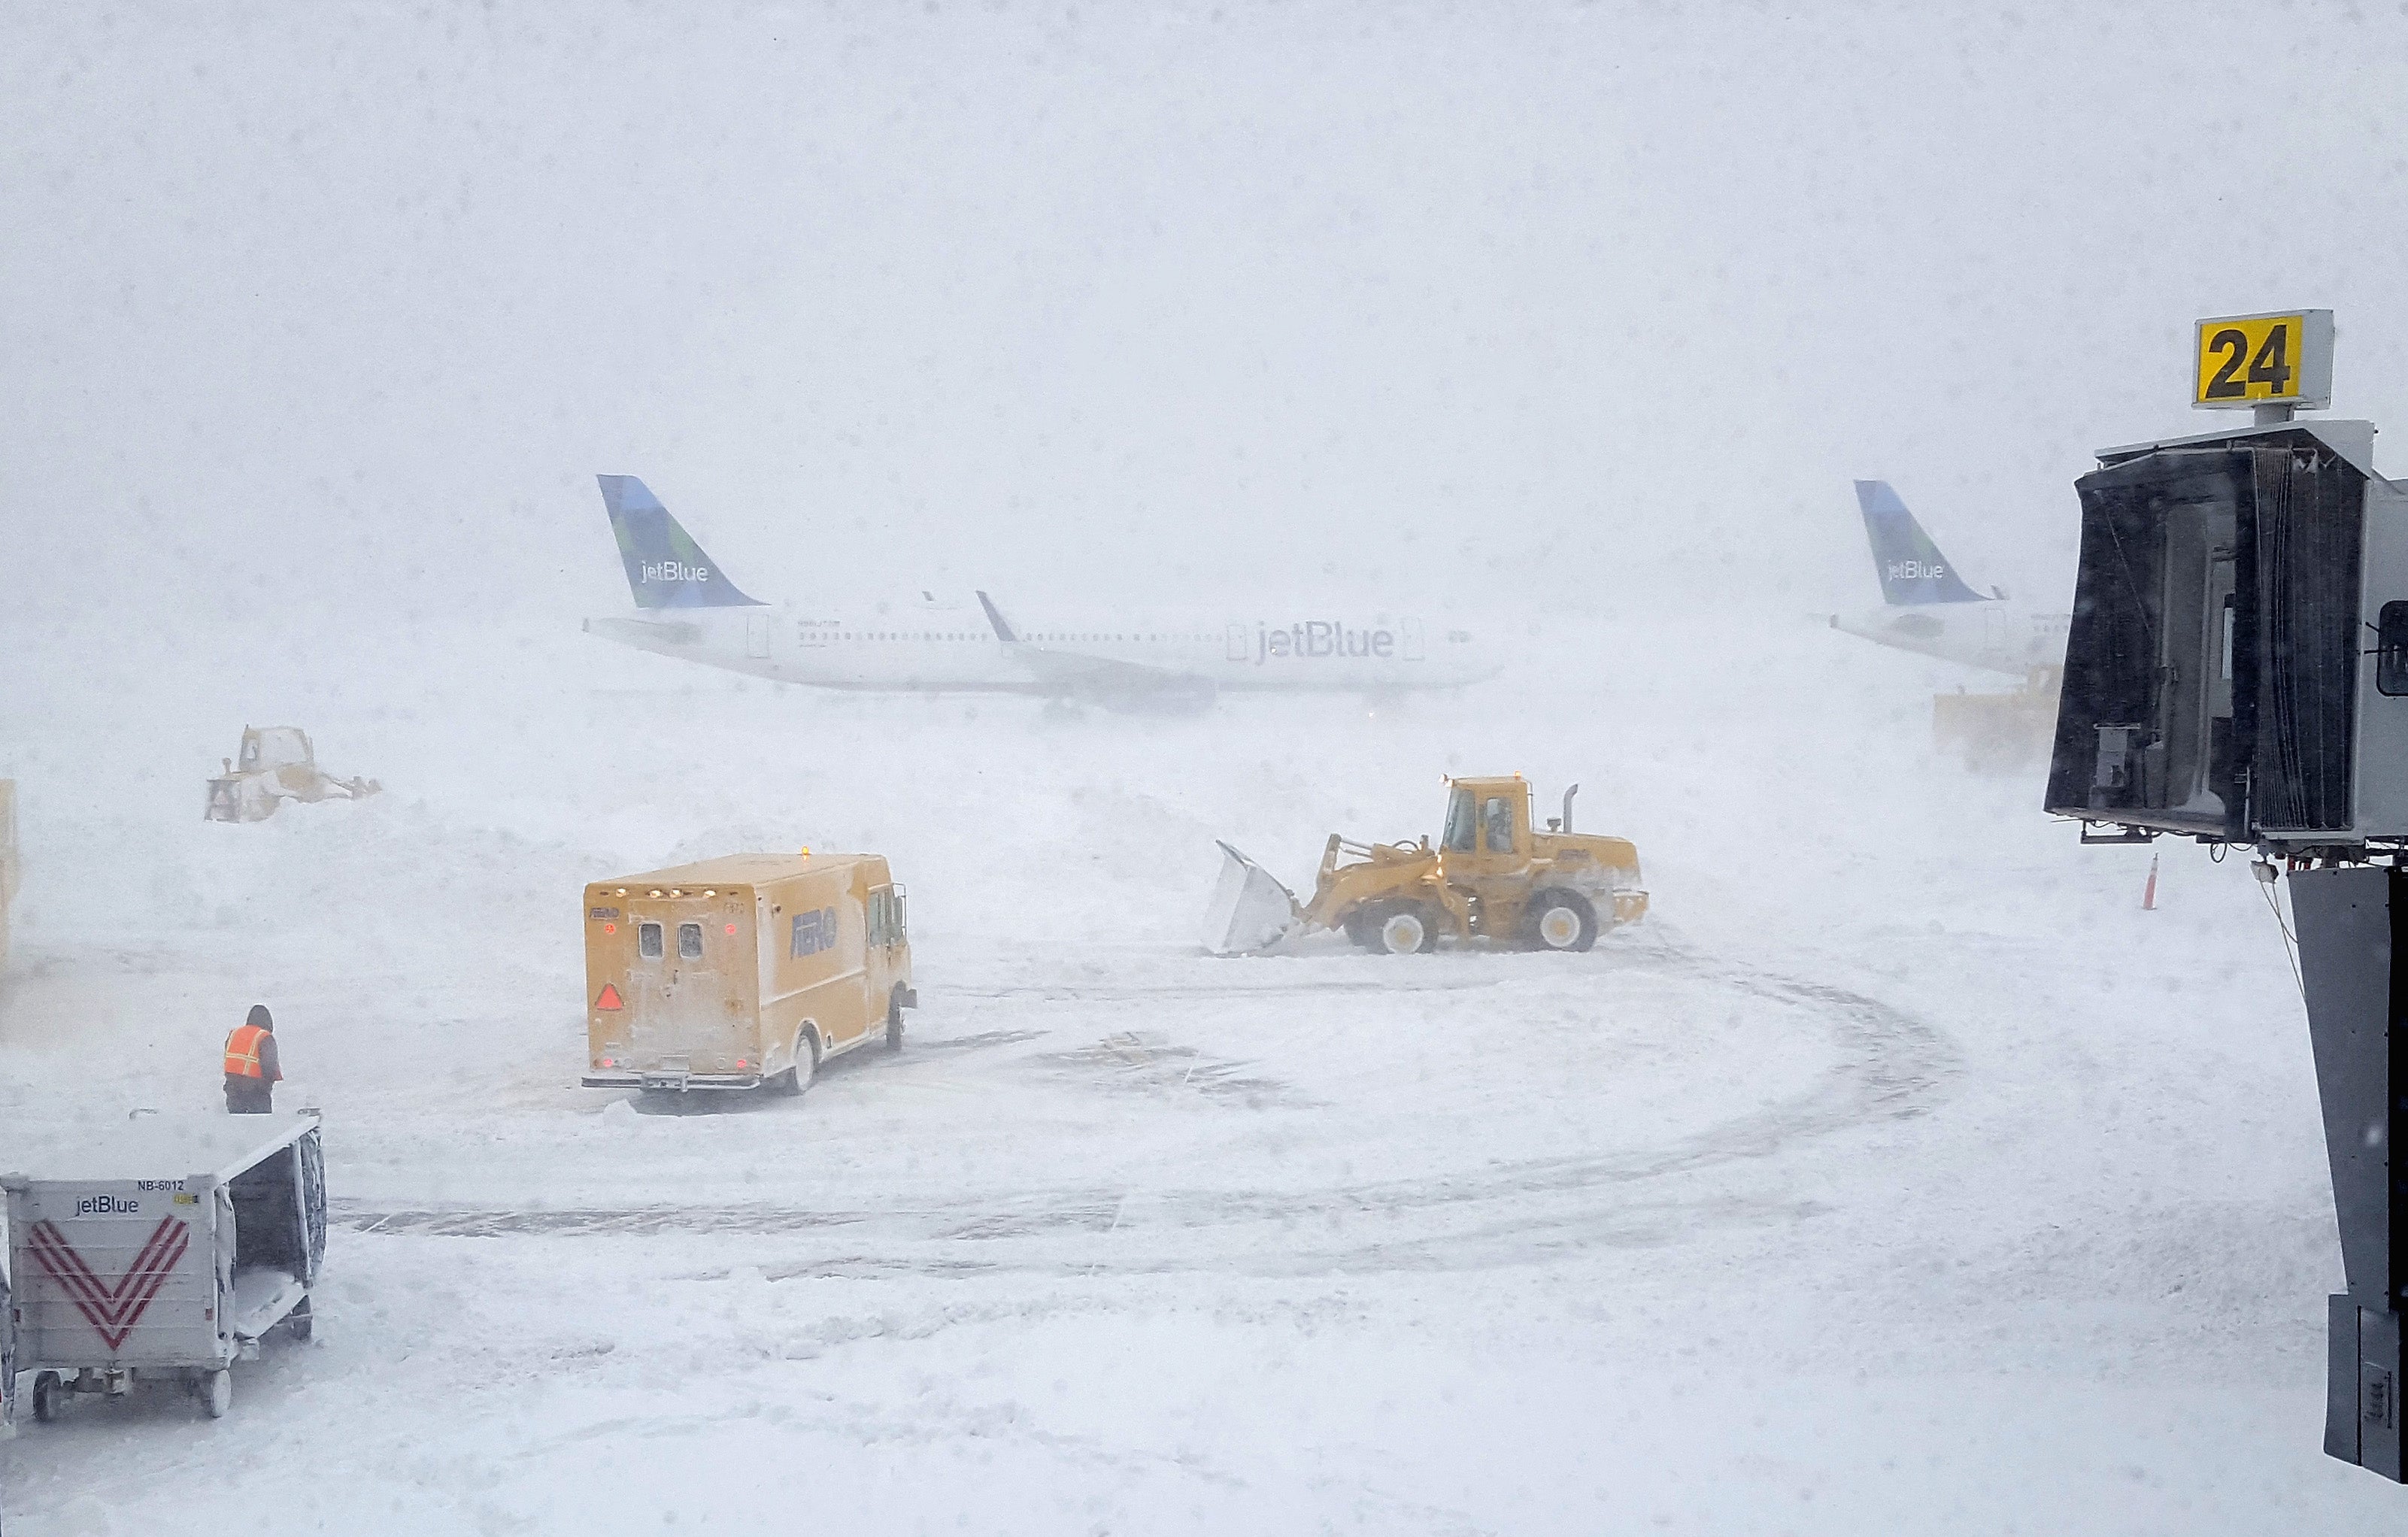 NEW YORK, NY - JANUARY 04: Snow plows move snow as a JetBlue airplane waits outside terminal five at John F. Kennedy International Airport on January 4, 2018 in the Queens borough of New York City. A winter storm is traveling up the east coast of the United States dumping snow and creating blizzard like conditions in many areas. (Photo by Rebecca Butala How/Getty Images)